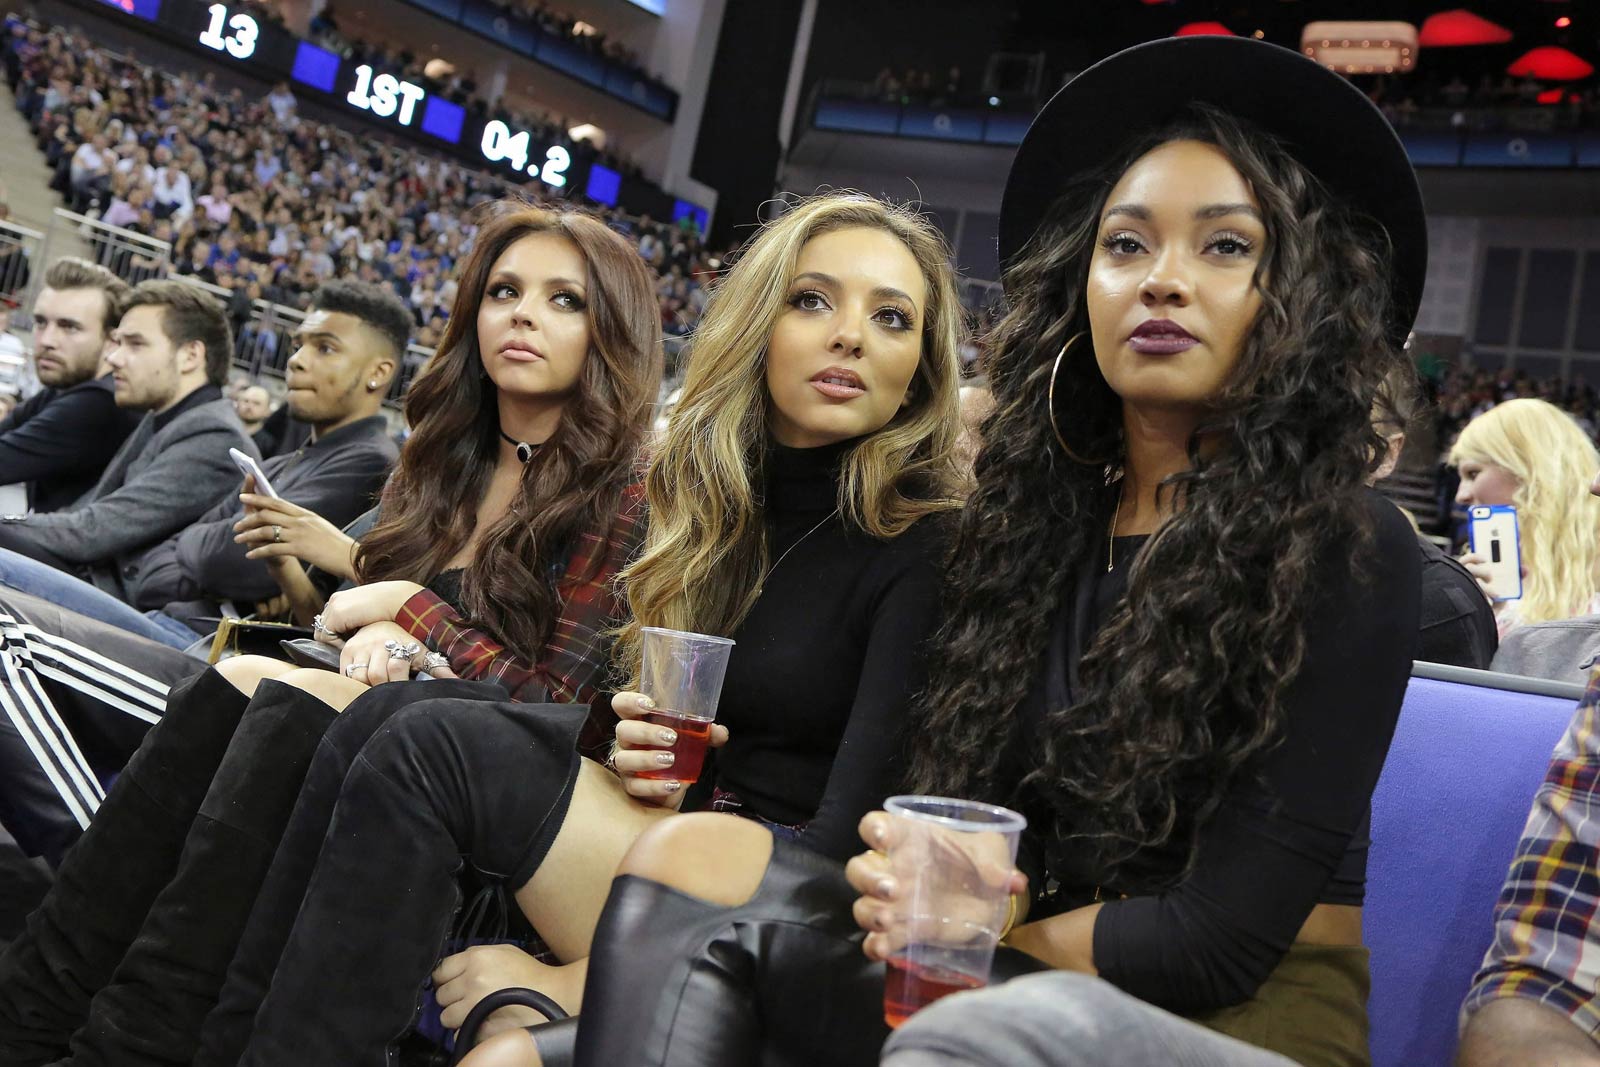 Leigh-Anne Pinnock, Jesy Nelson & Jade Thirlwall at an NBA Global Games